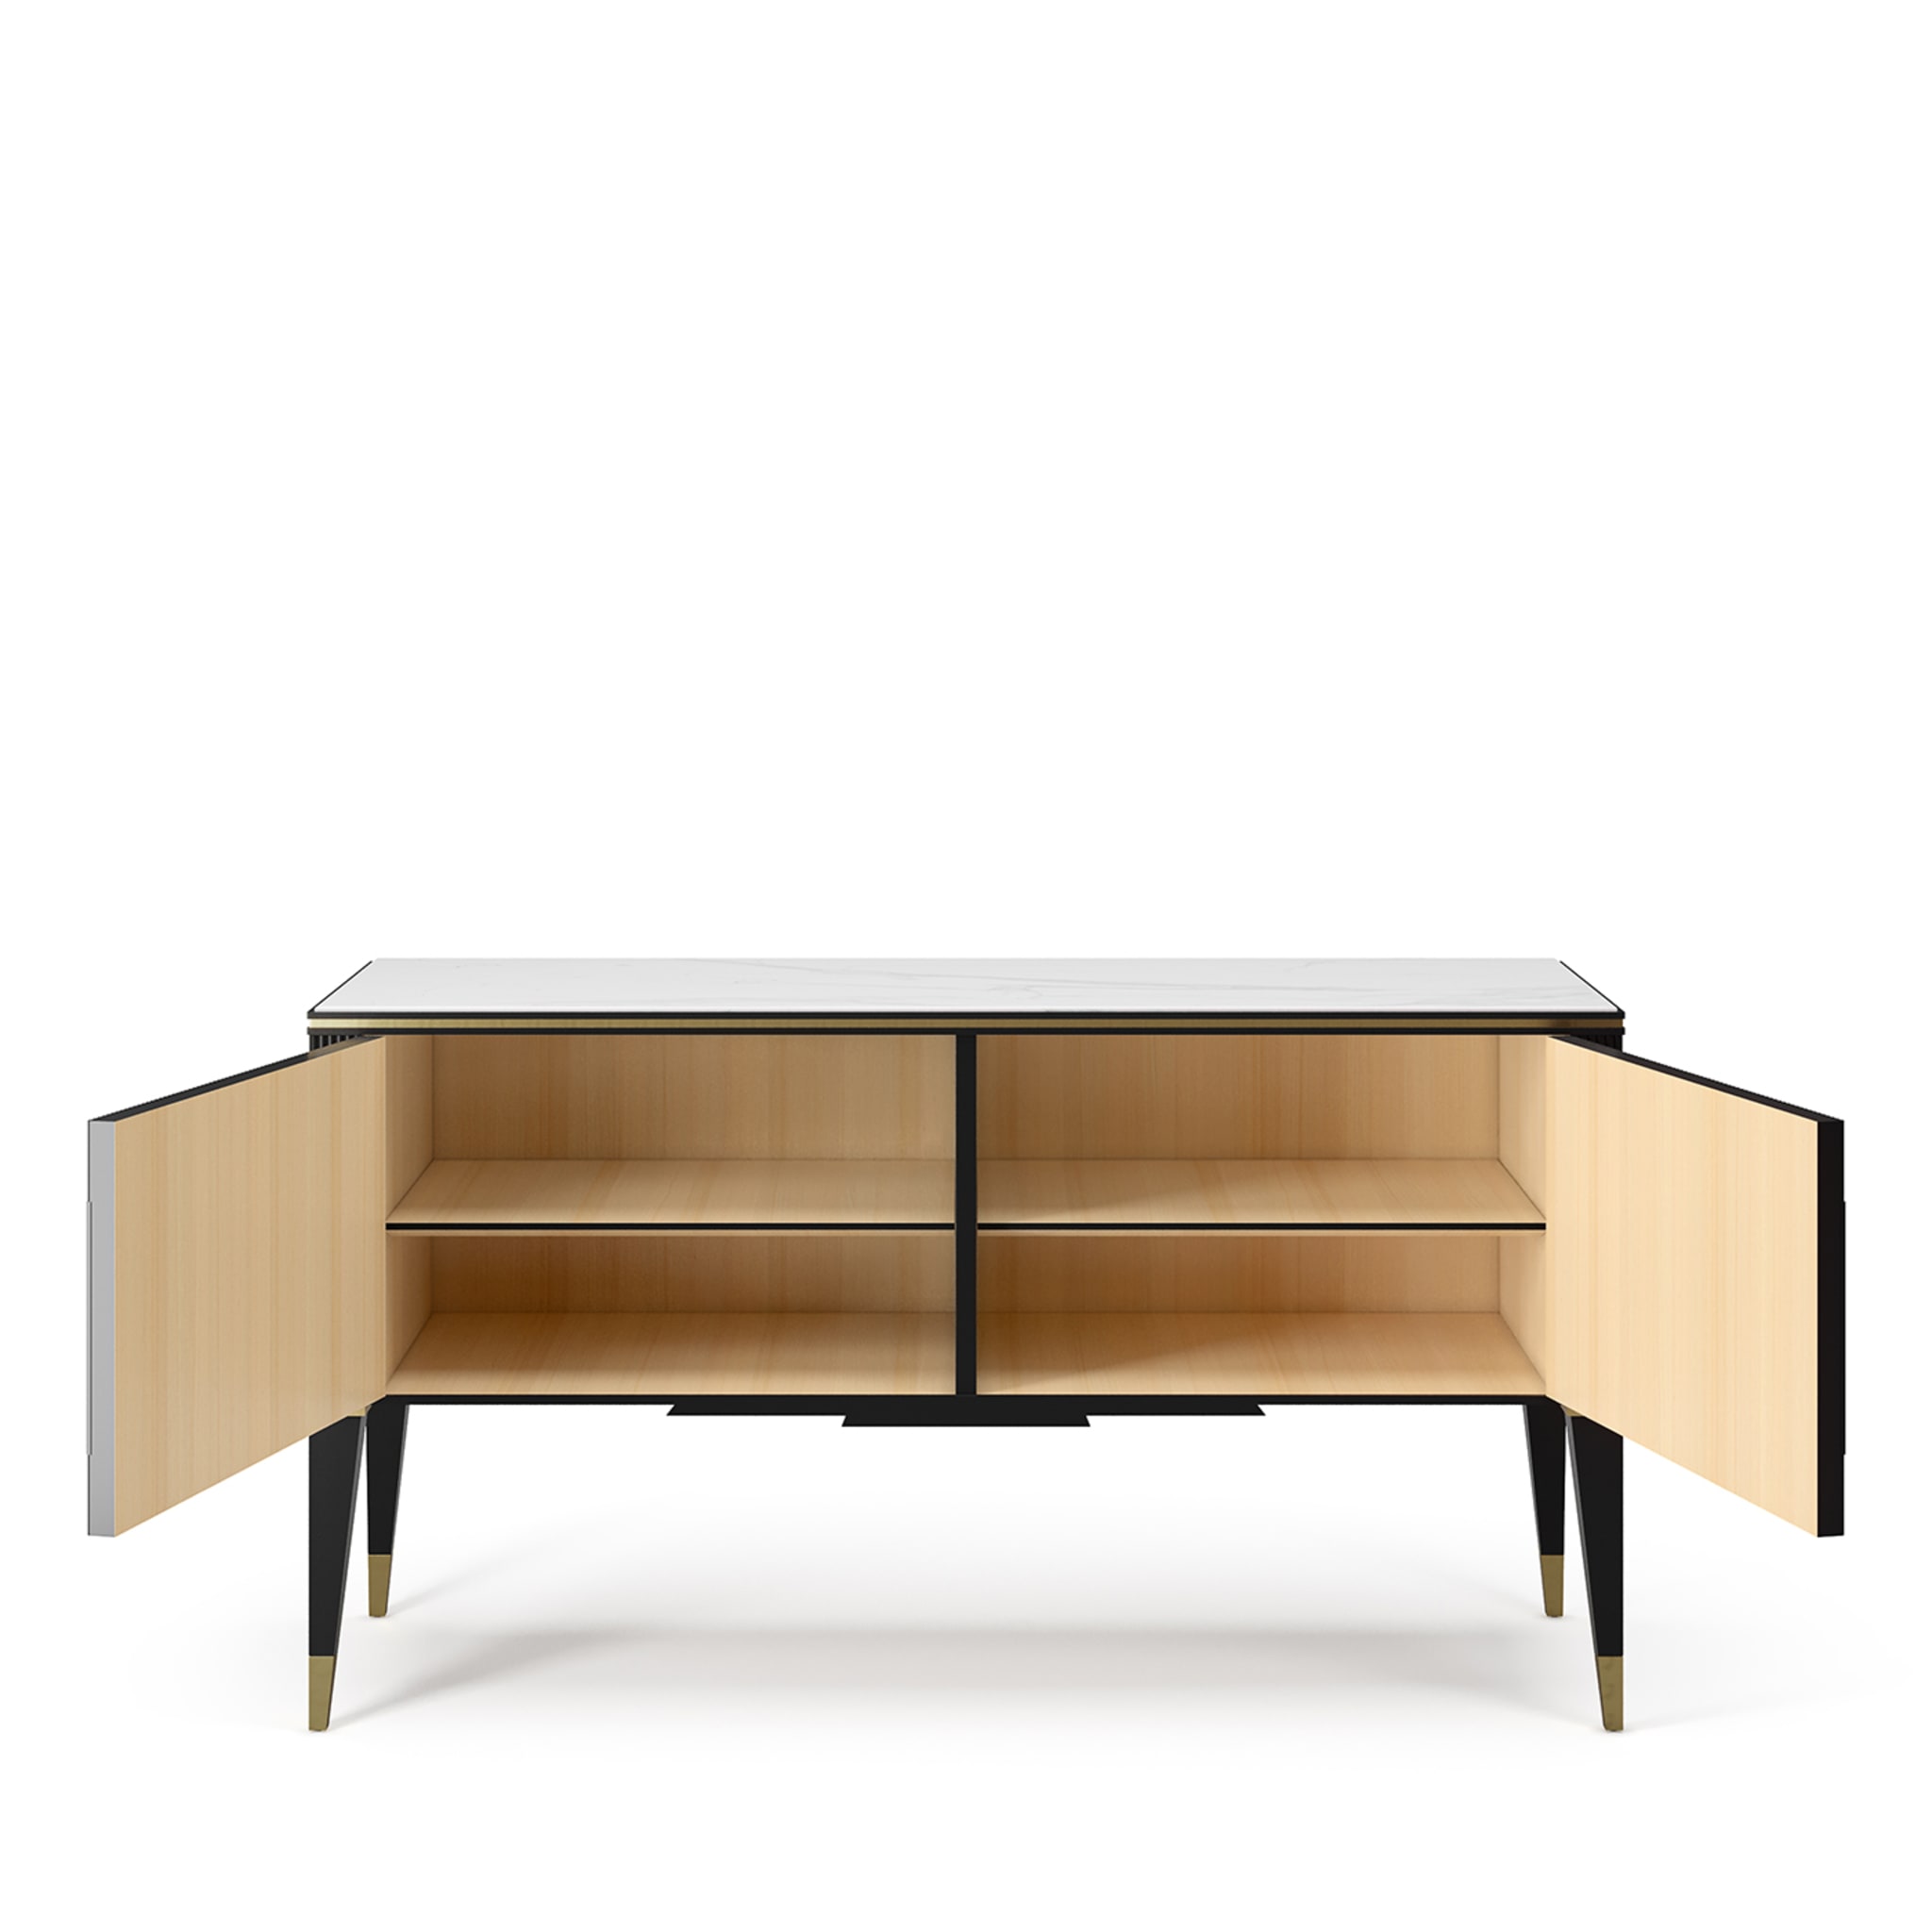 Thousand Lines Deco Black Sideboard - Alternative view 1